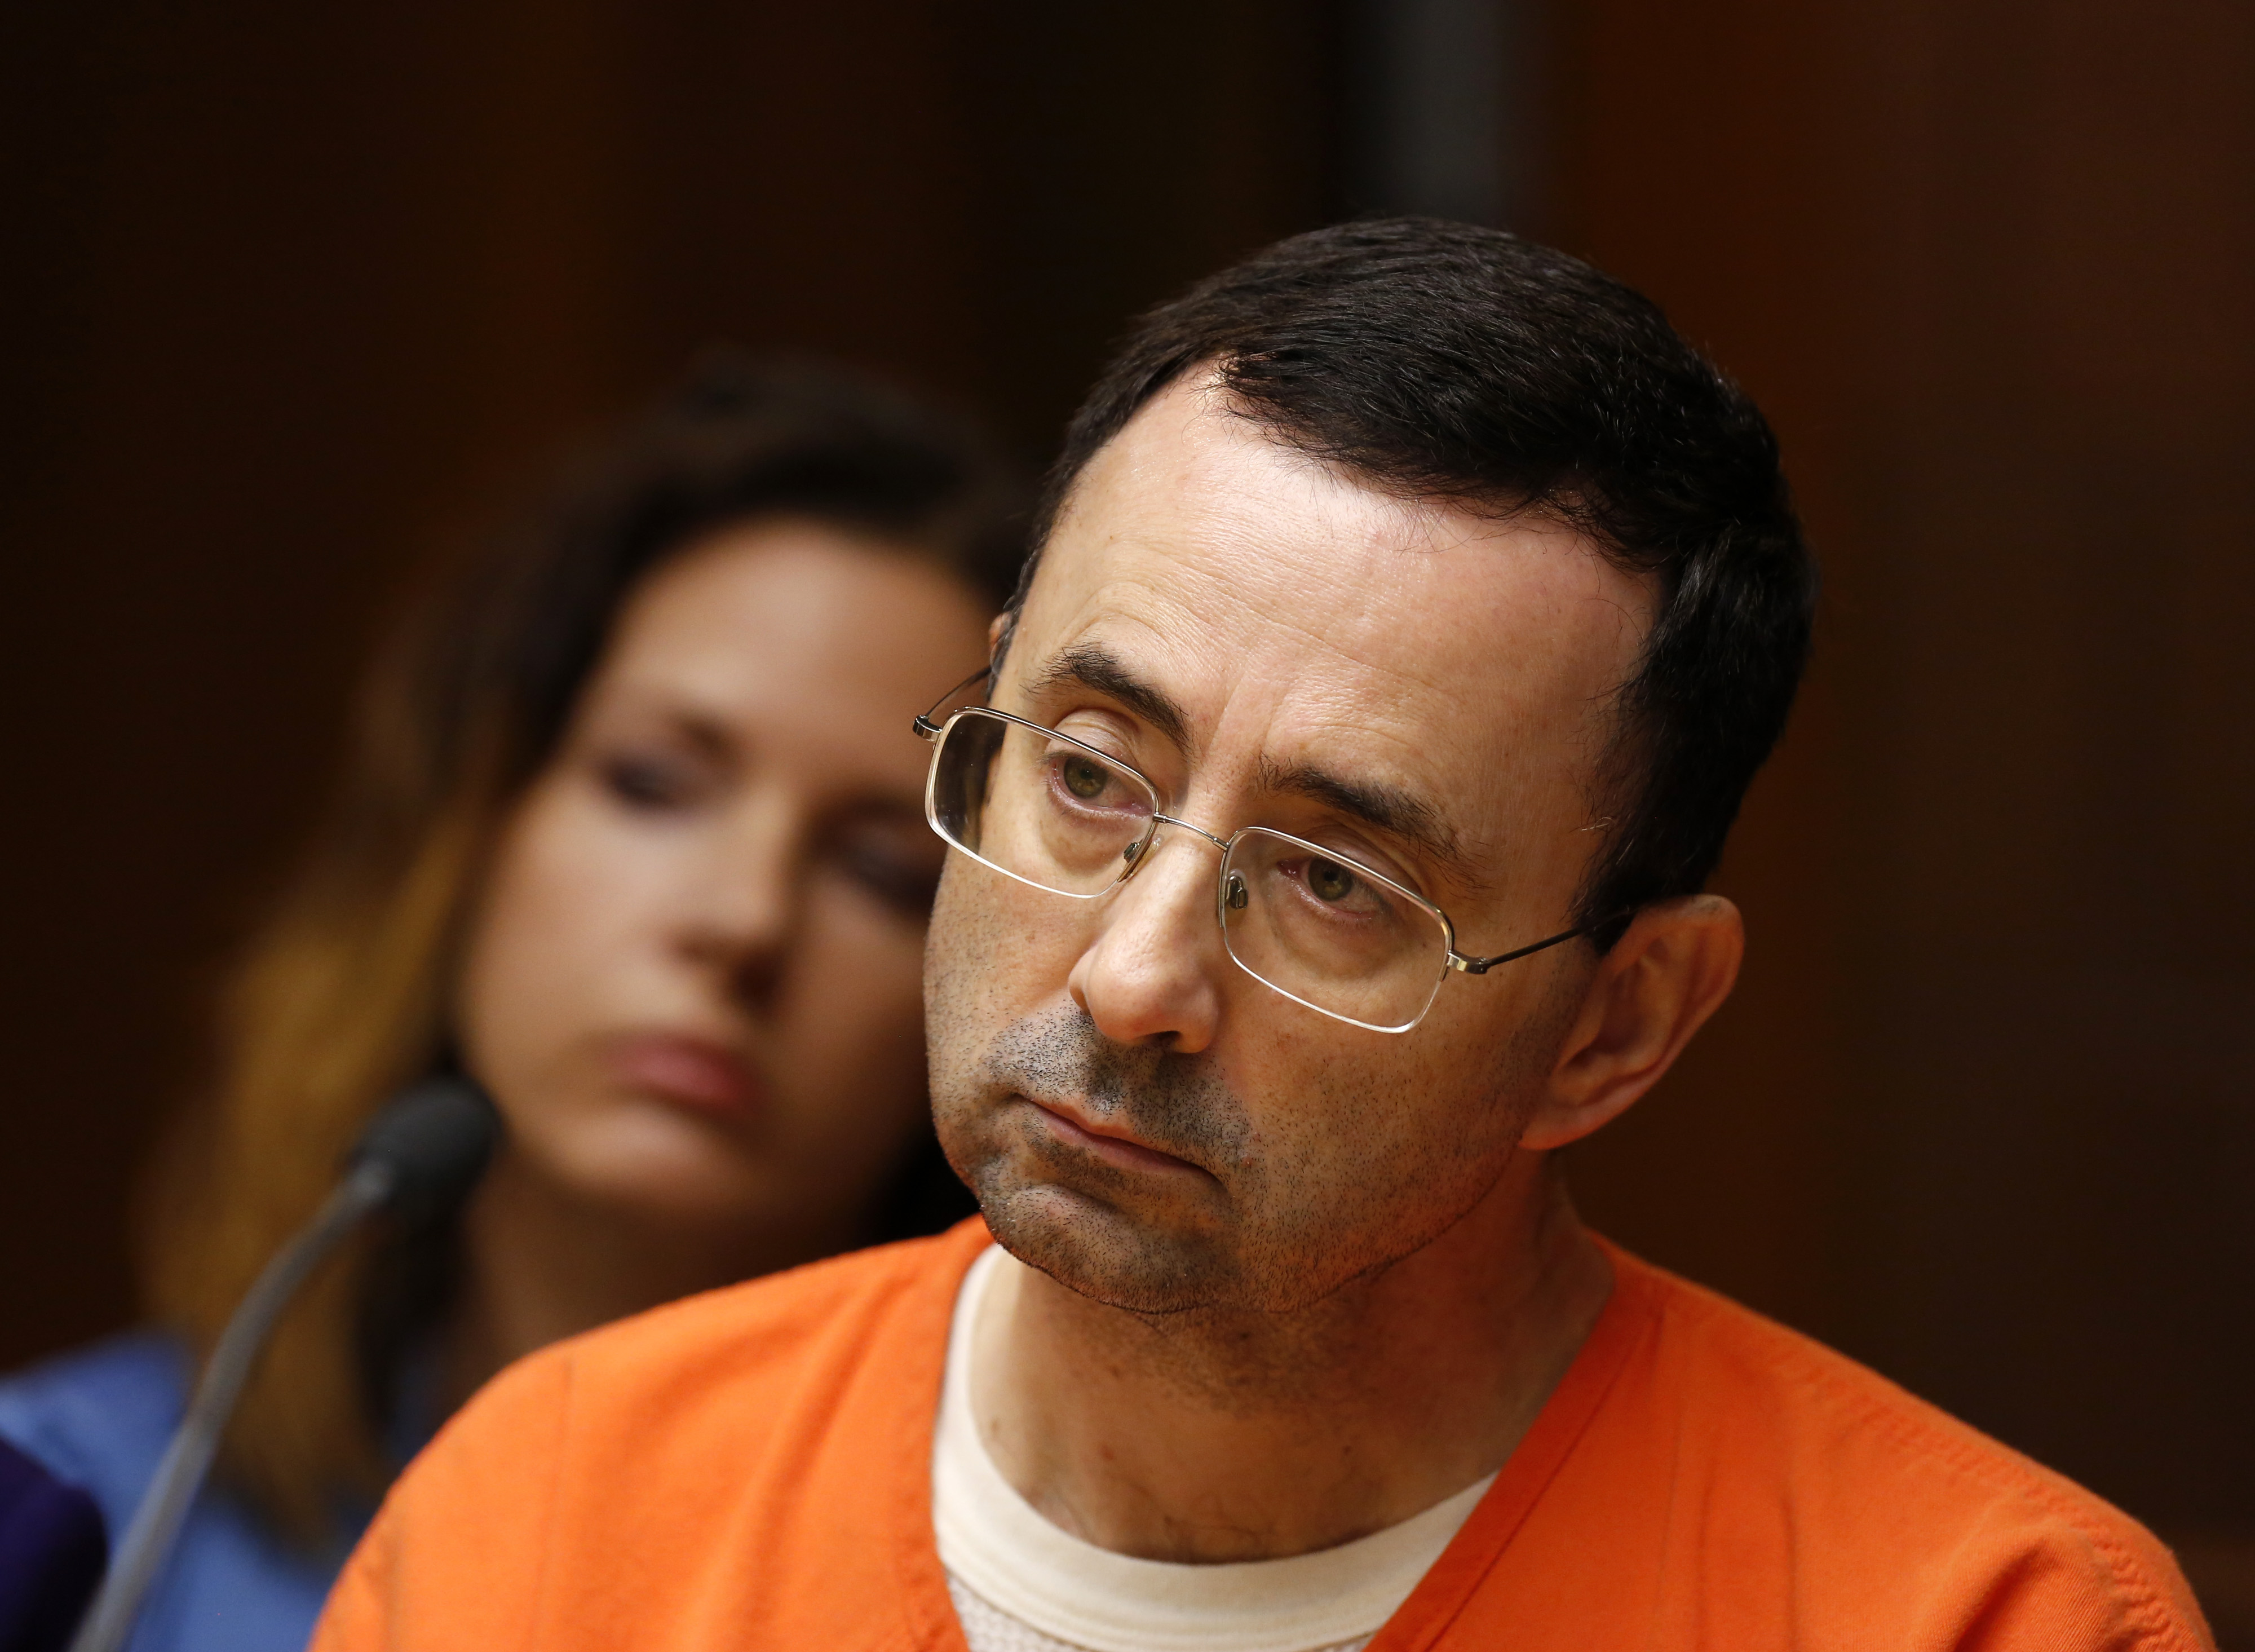 Former Michigan State University and USA Gymnastics doctor Larry Nassar is seen in the 55th District Court where Judge Donald Allen Jr. bound him over on June 23, 2017 in Mason, Michigan to stand trial on 12 counts of first-degree criminal sexual conduct. / AFP PHOTO / JEFF KOWALSKY / Getty Images)